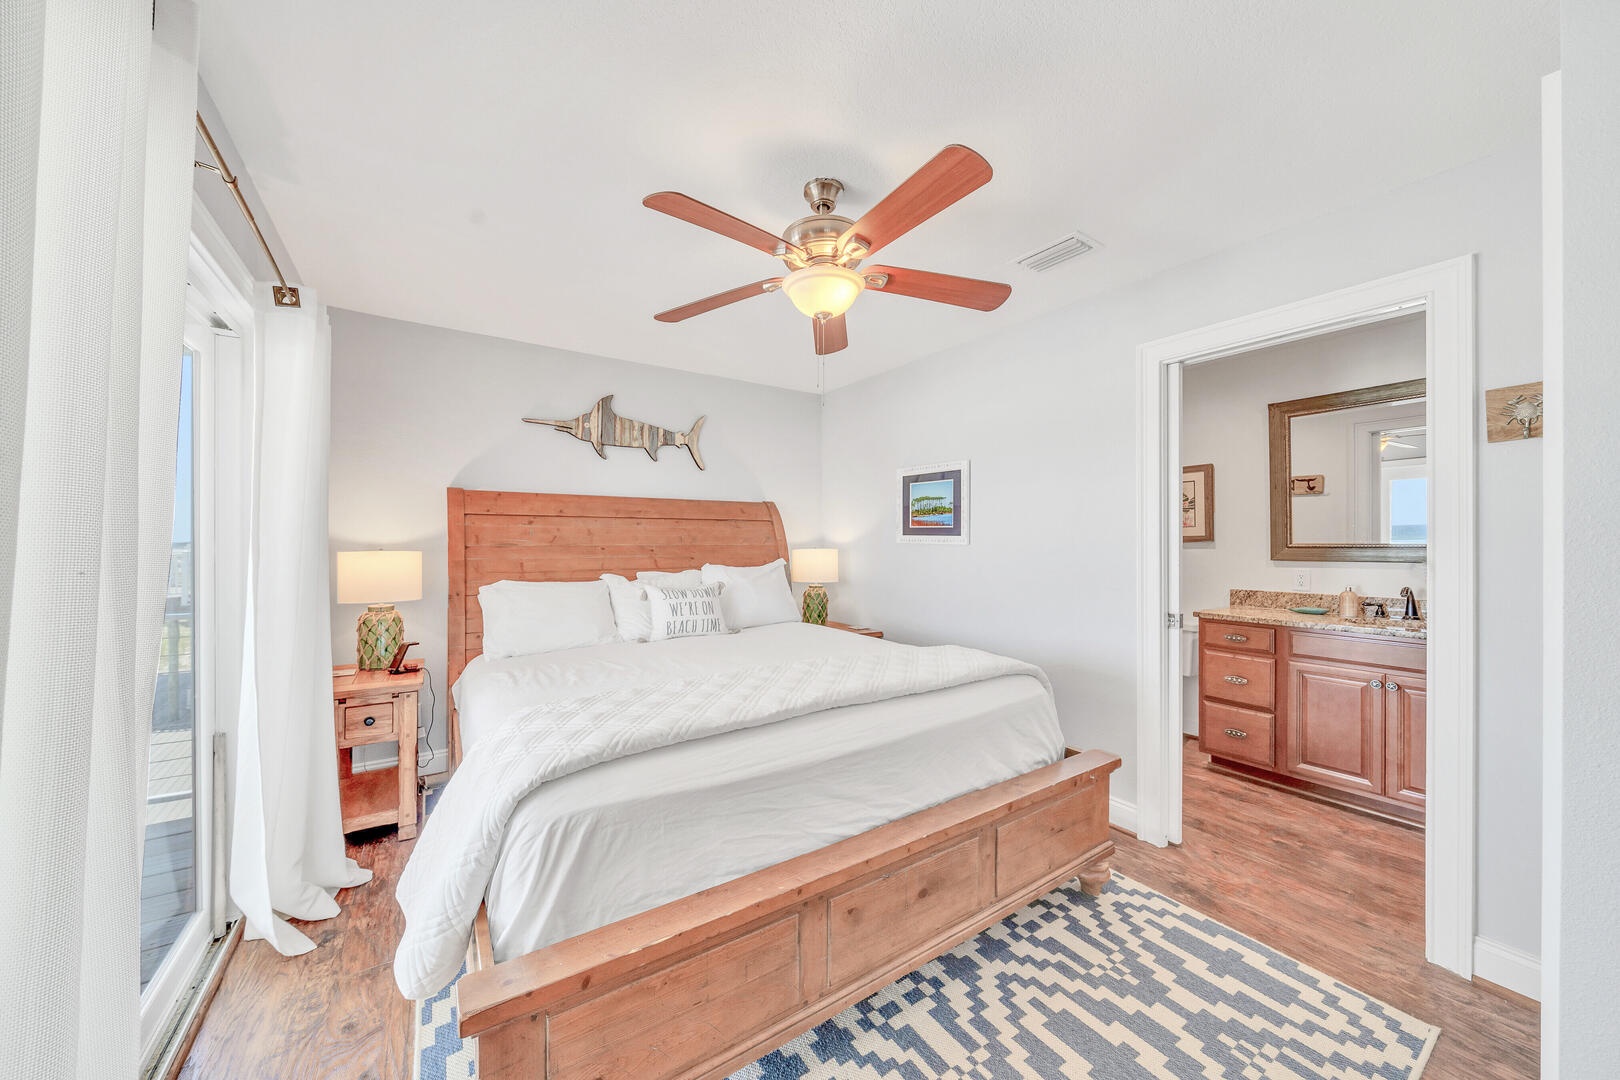 The master bedroom features a king size bed, private bathroom, and Gulf views!